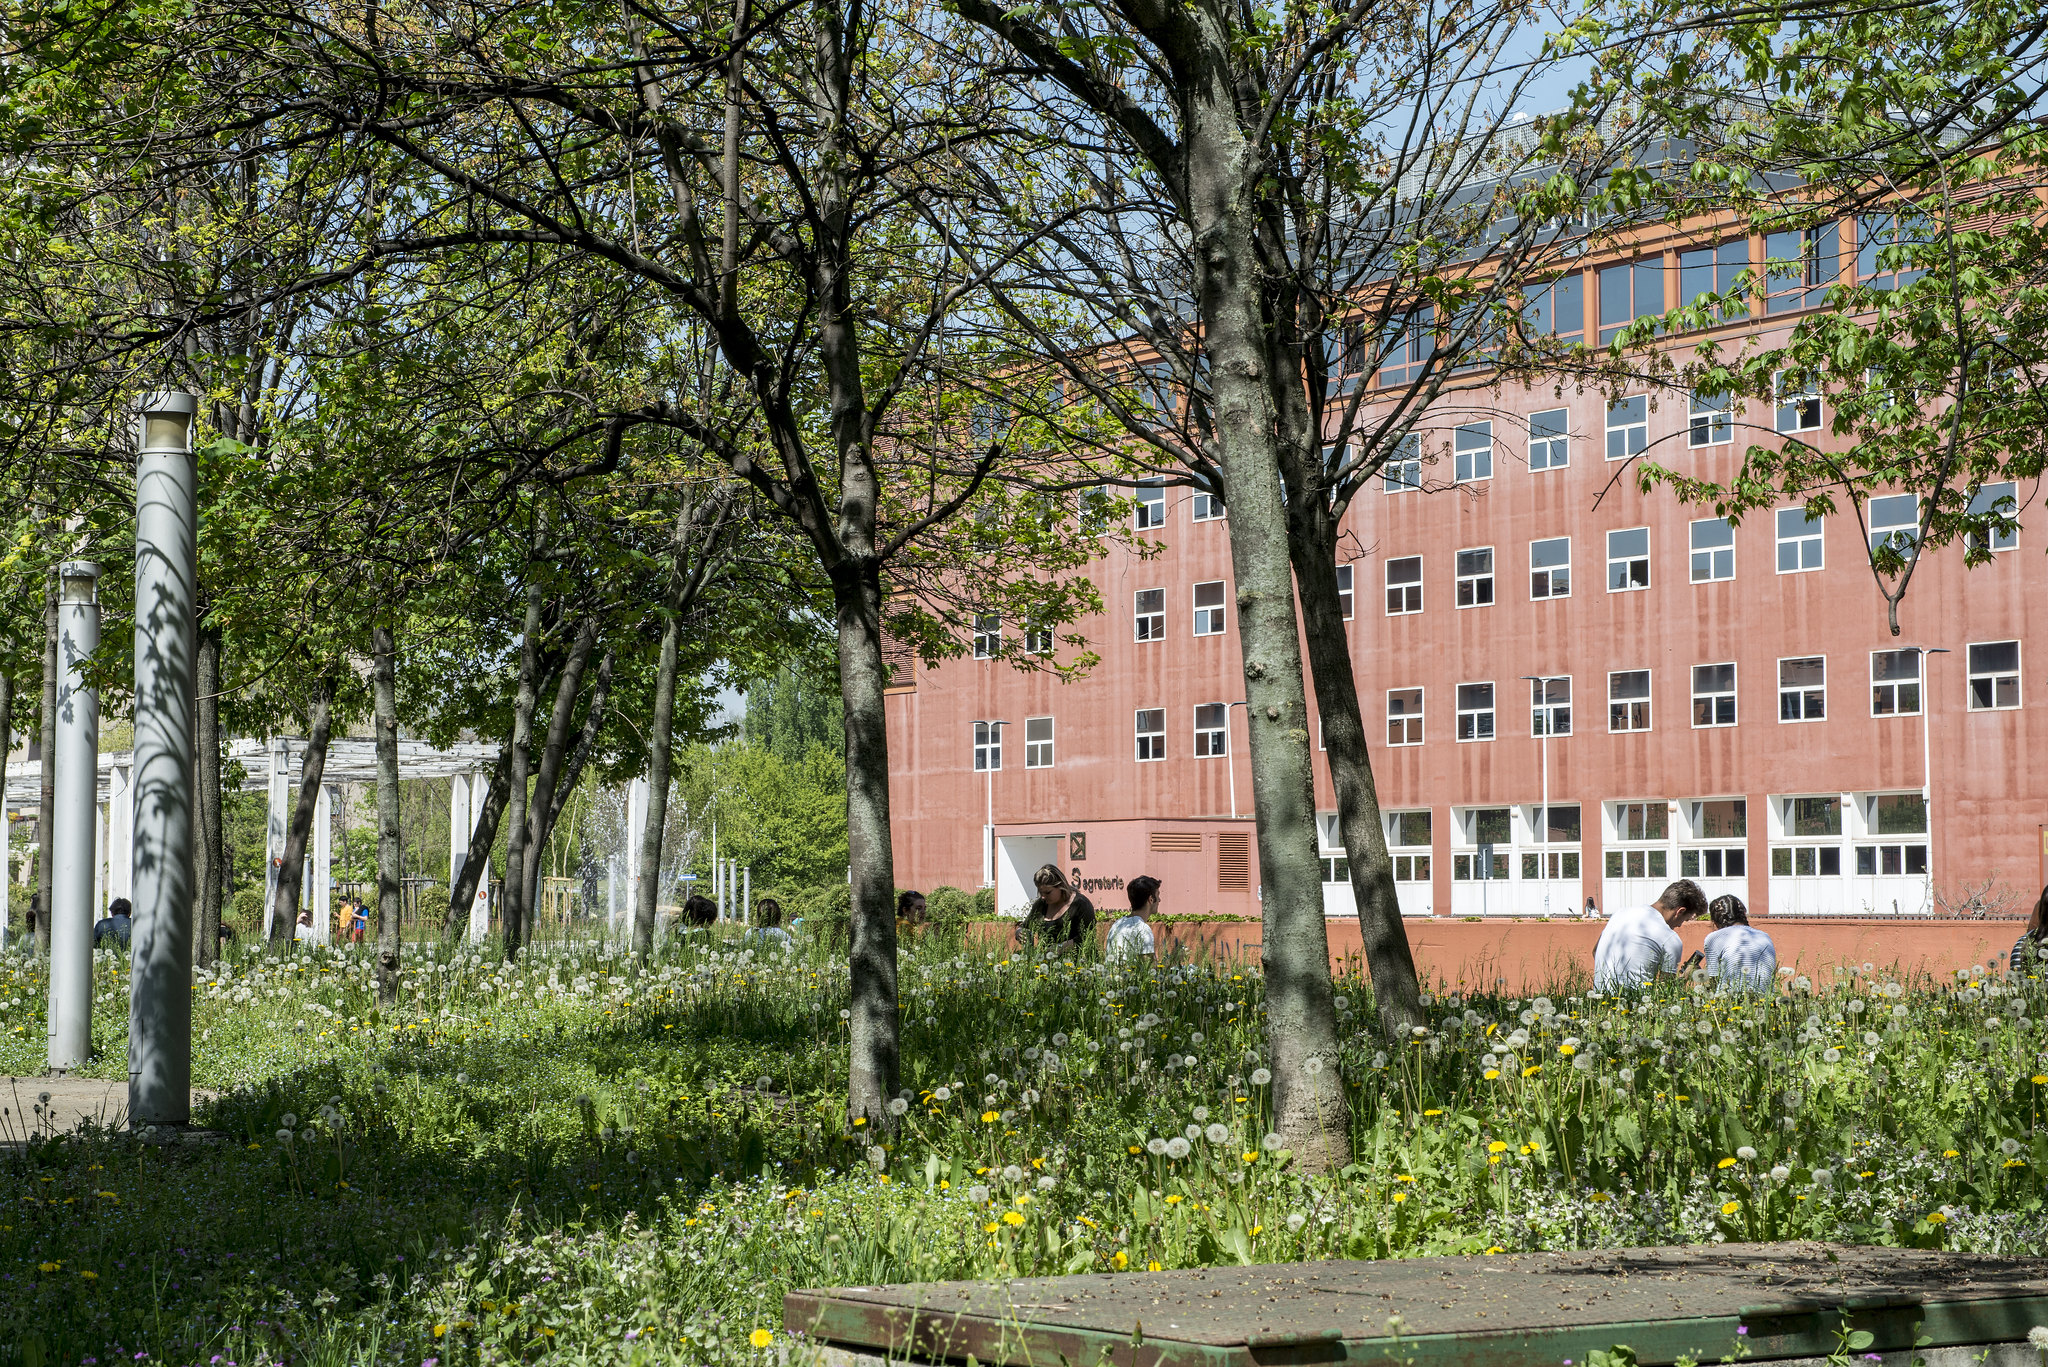 A Bicocca building with trees